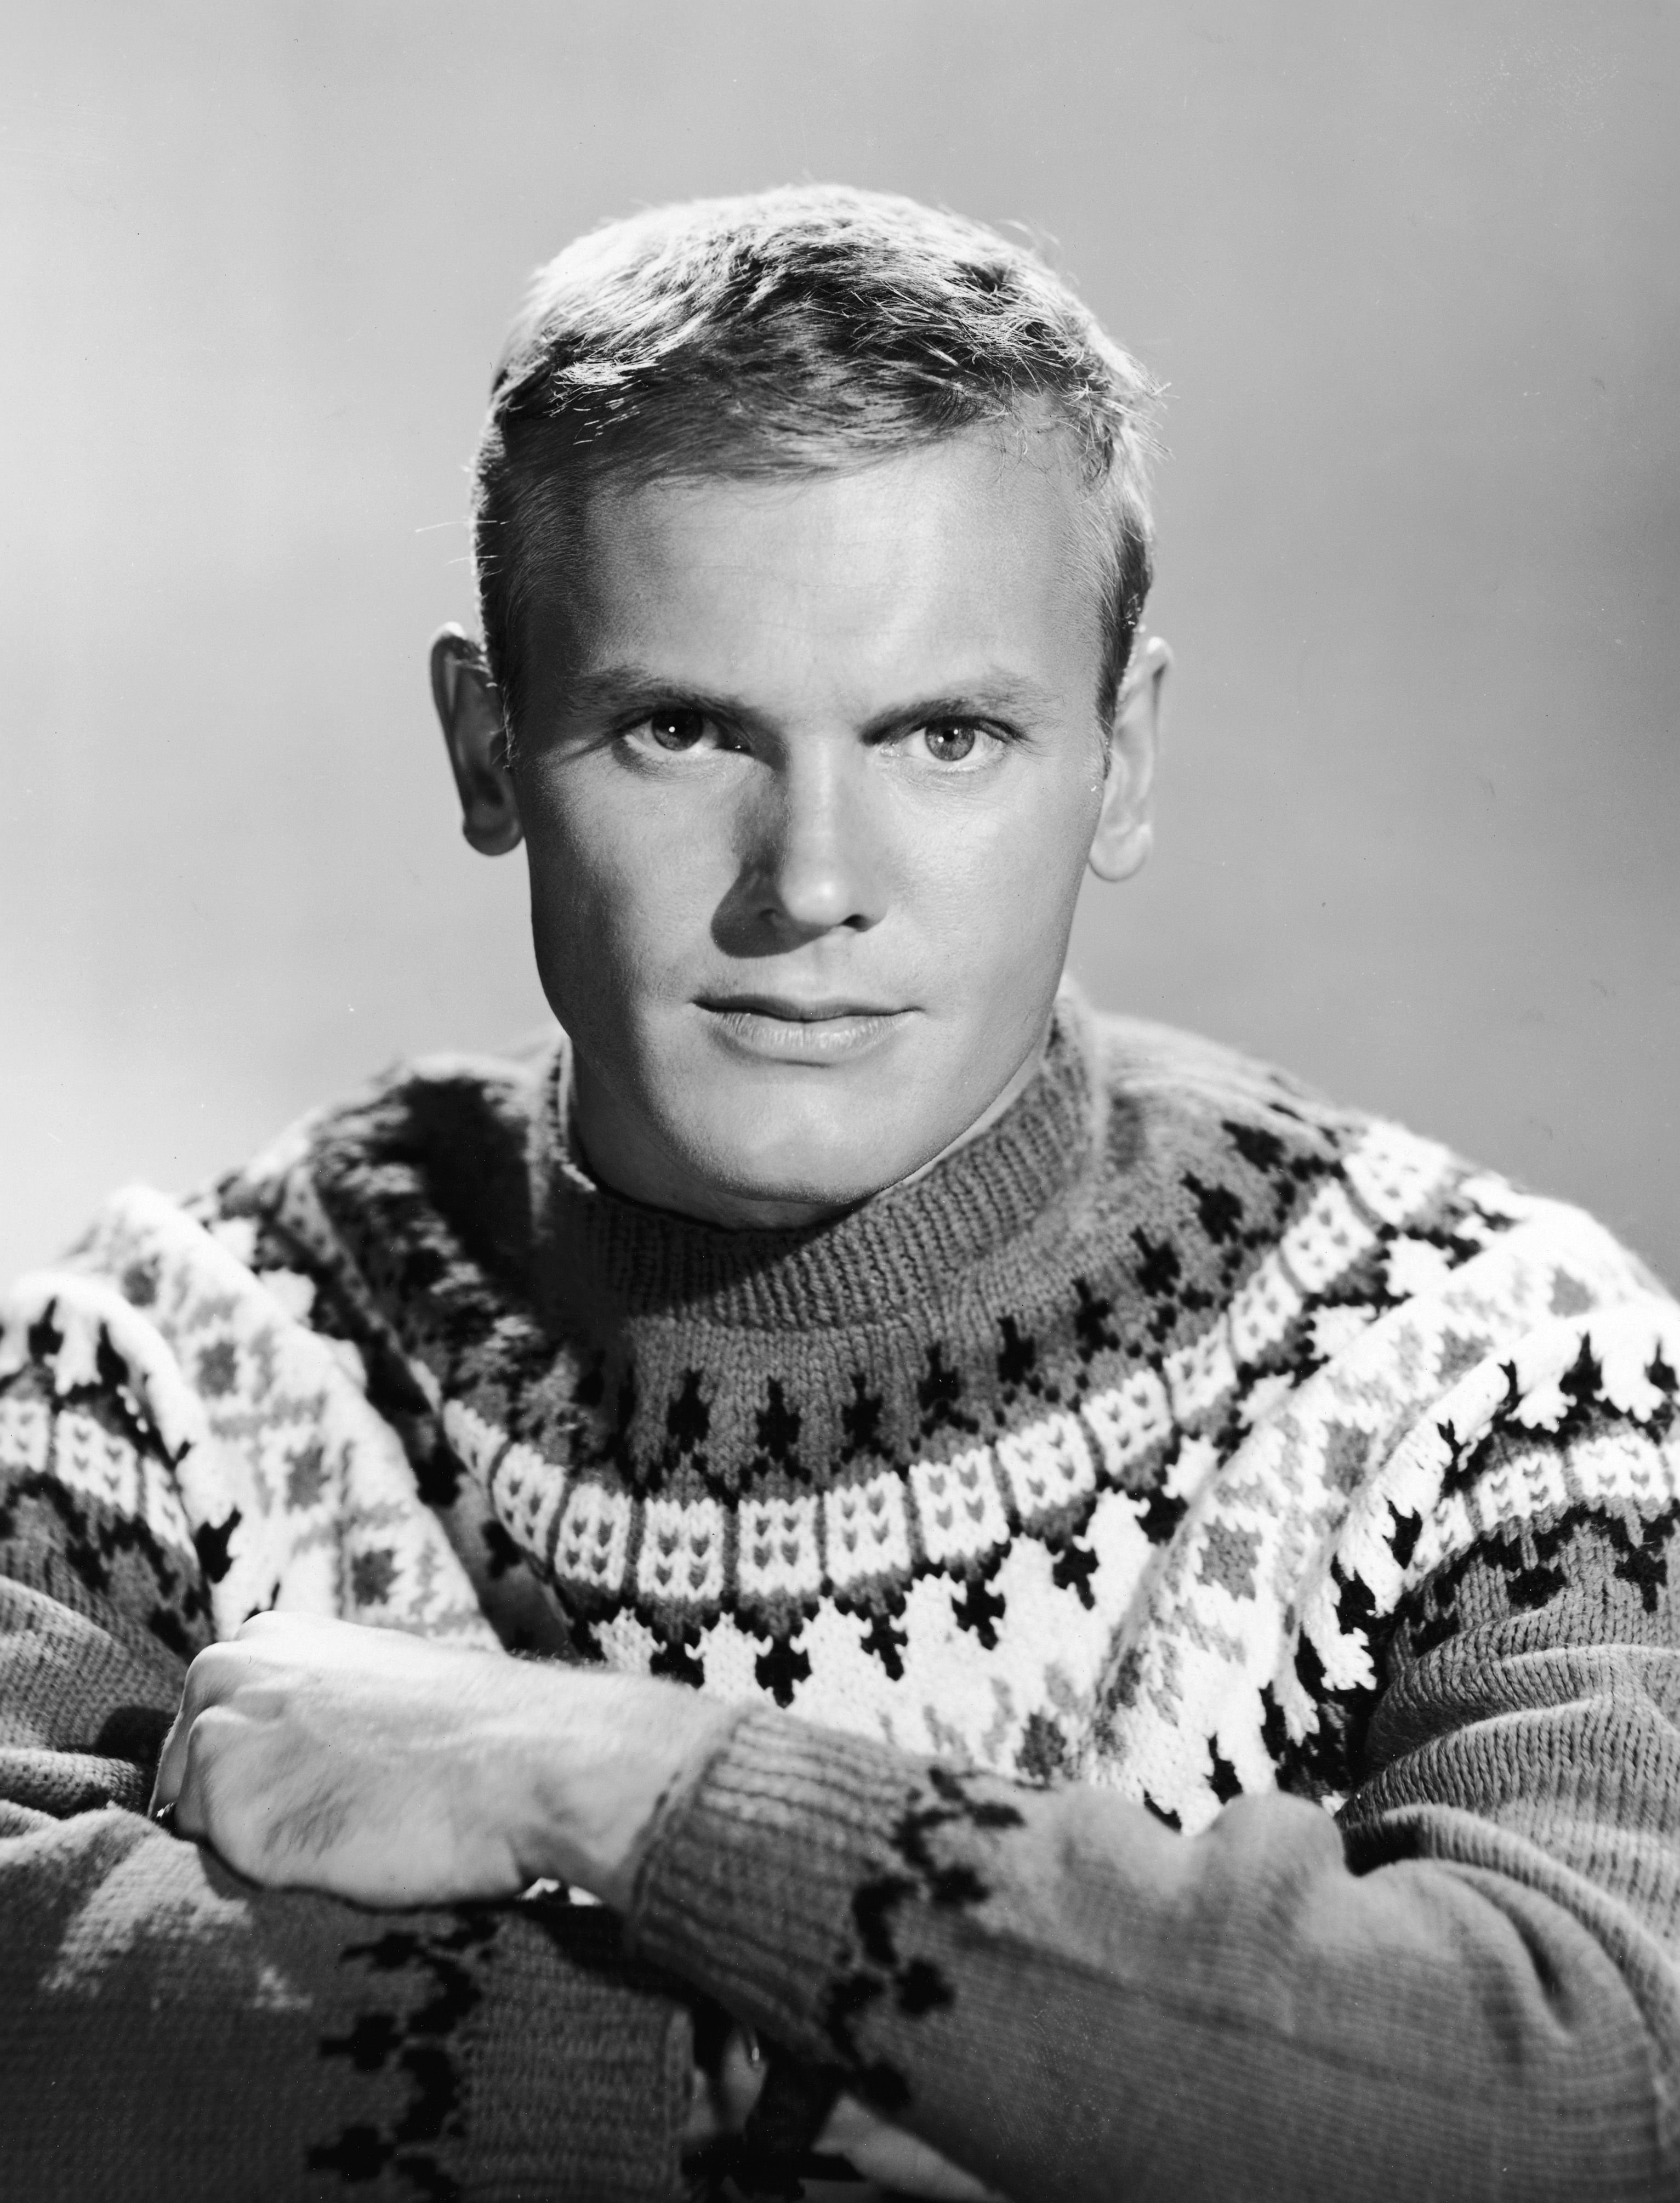  Tab Hunter wearing a ski sweater in a promotional portrait for "The Tab Hunter Show" in 1960. | Photo: Getty Images